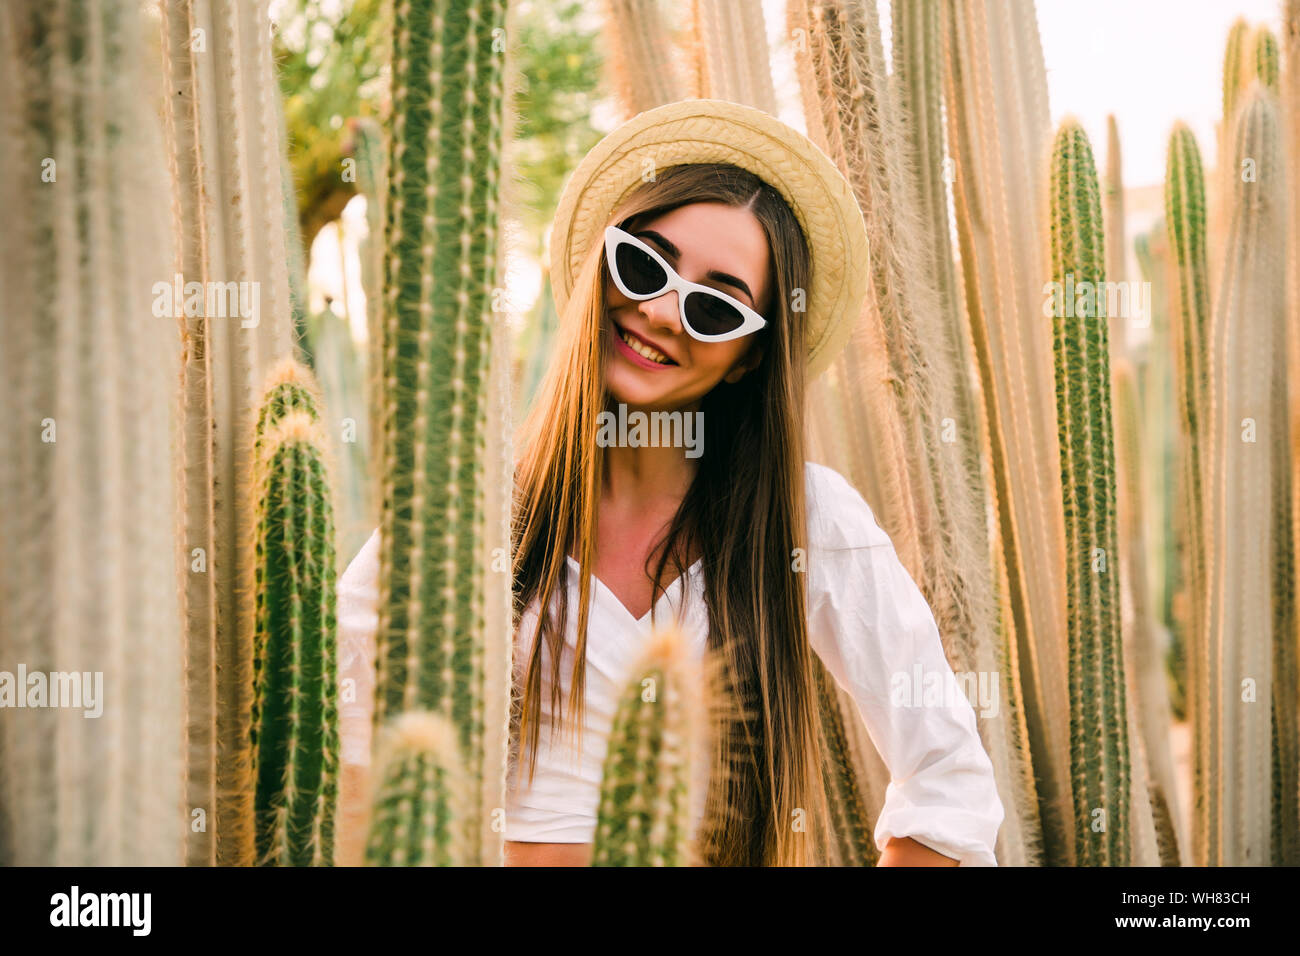 Hippie woman in long pink skirt walking near big cactuses Stock Photo